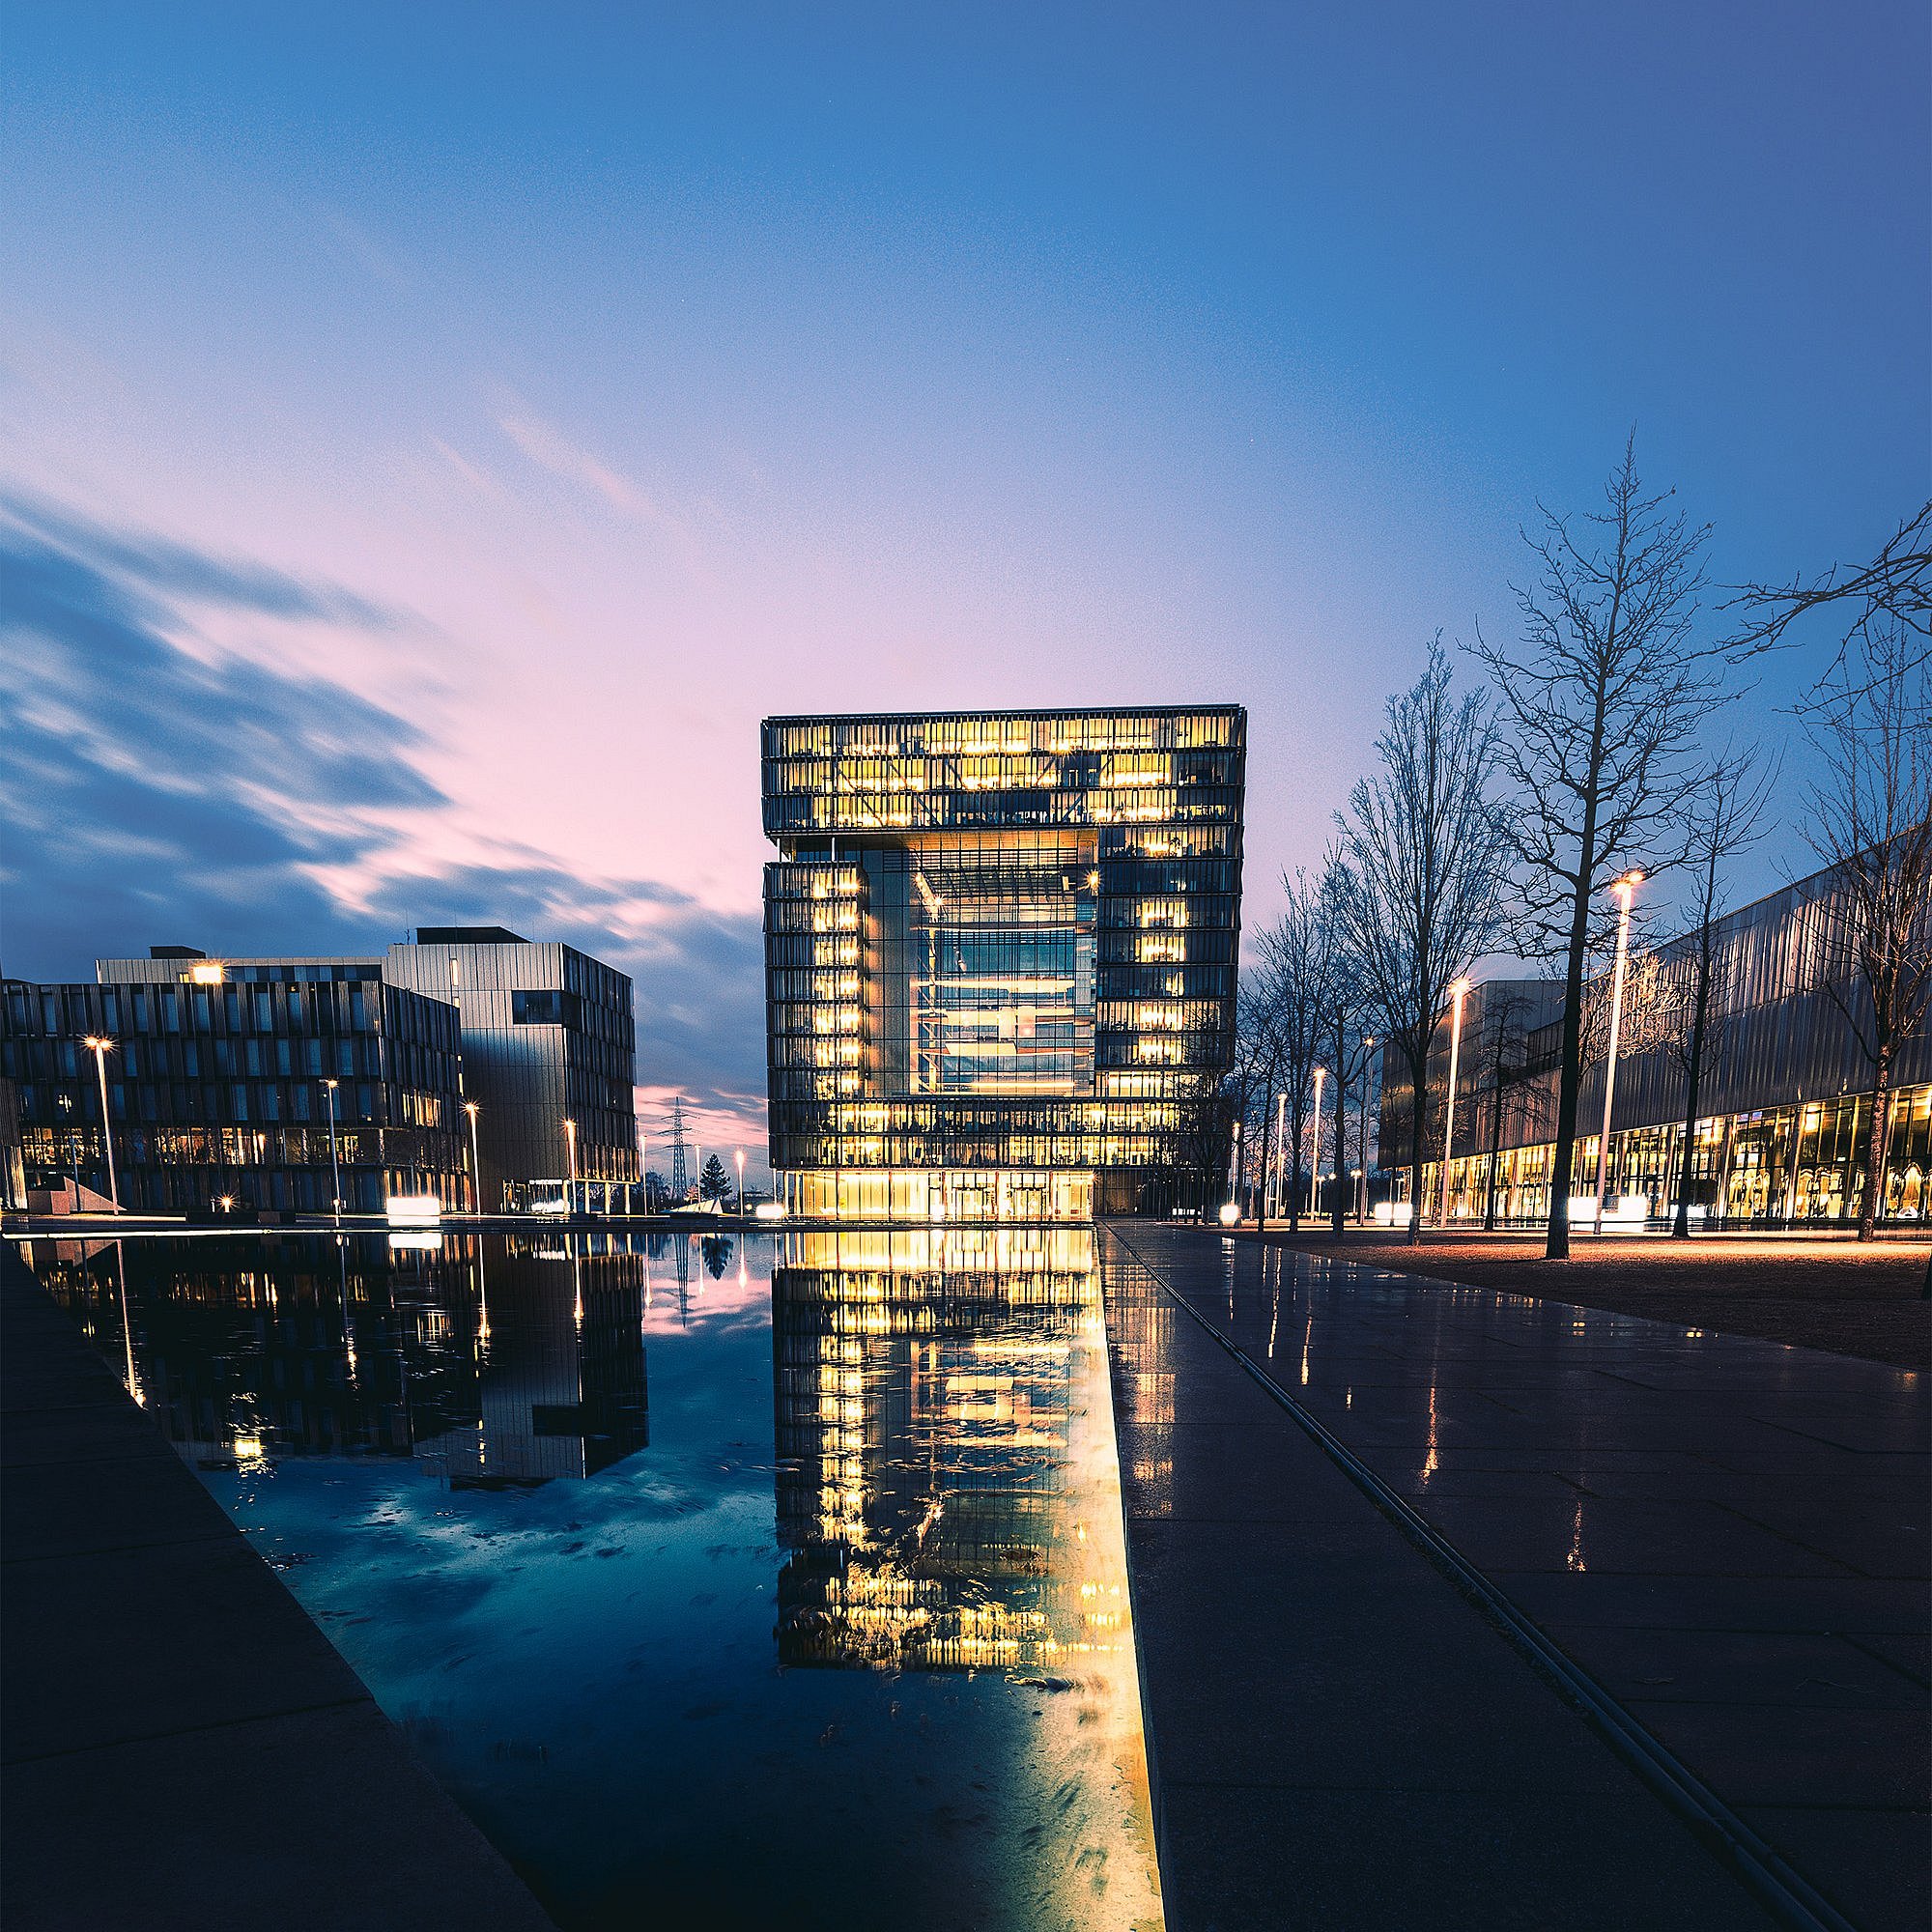  Modern real estate in the Ruhr region such as the thyssenkrupp Quarter in Essen pictured here. The illuminated office building can be seen in the evening sky with reflections in the water.